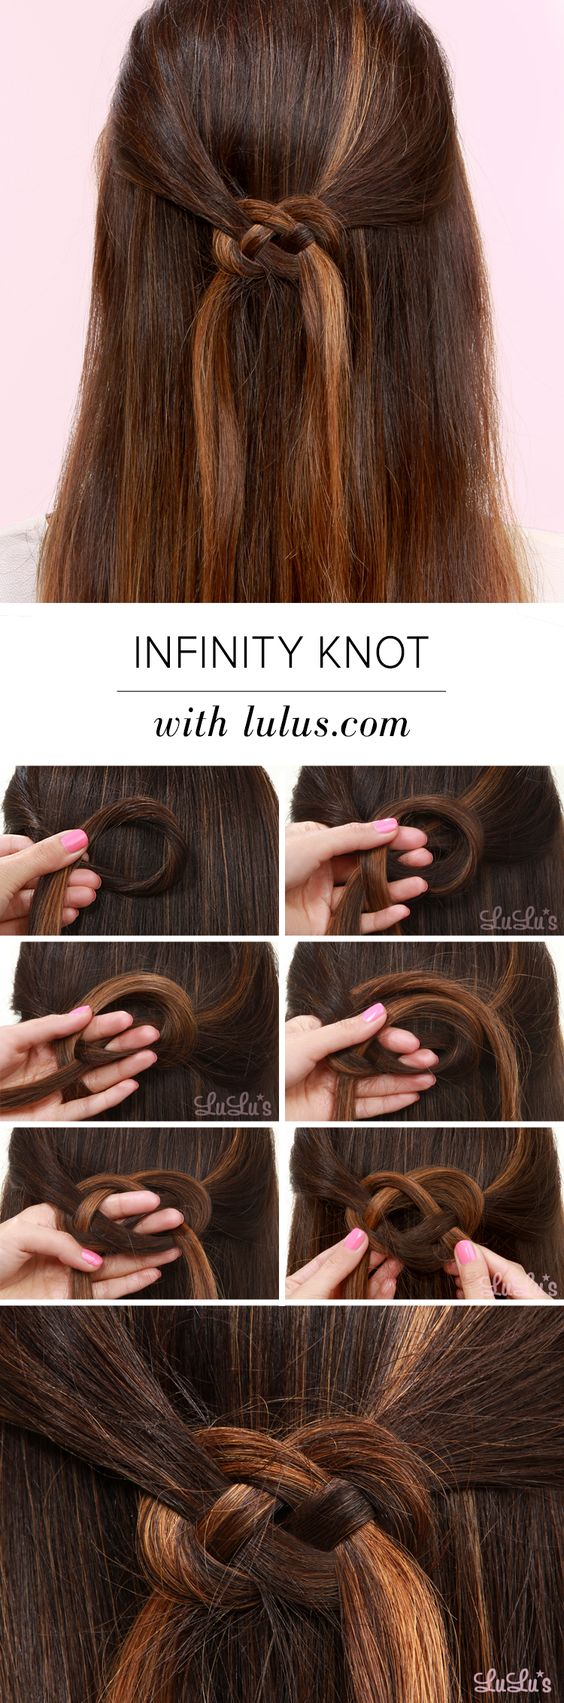 Infinity knot over